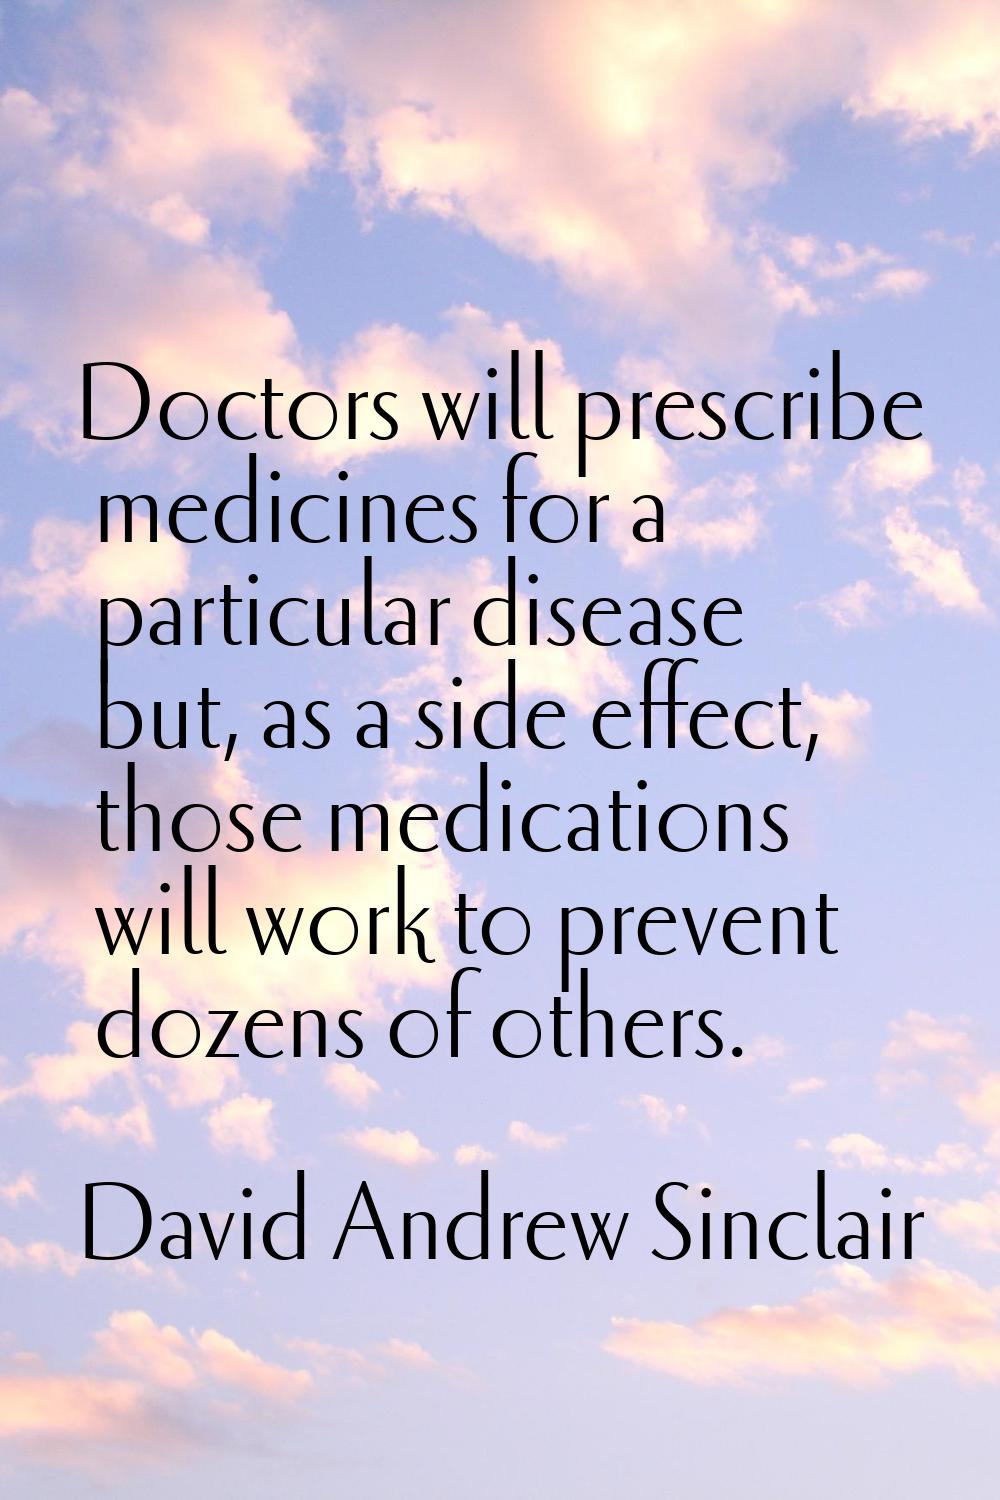 Doctors will prescribe medicines for a particular disease but, as a side effect, those medications 